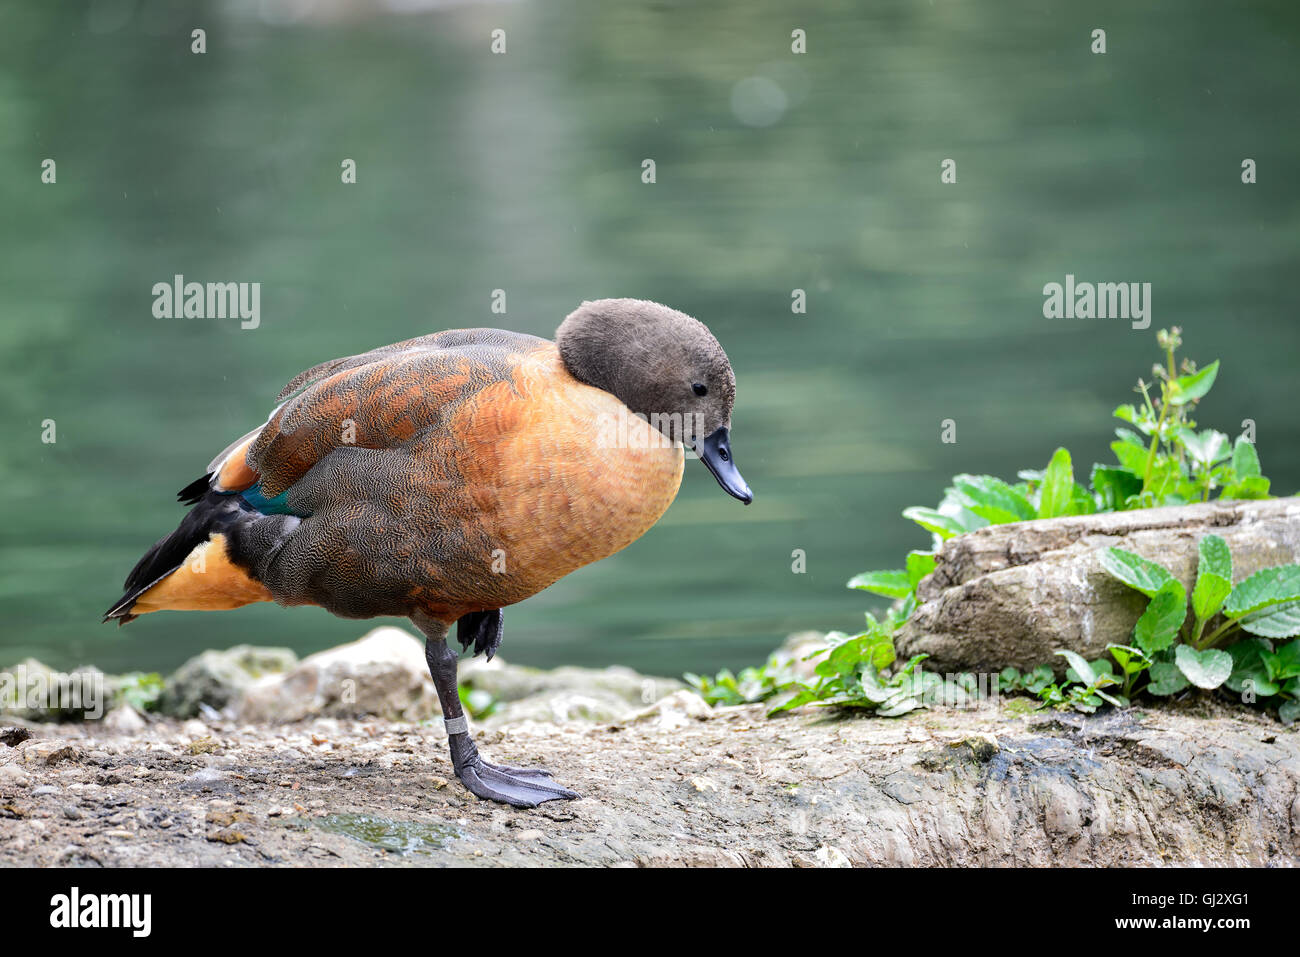 Beautiful portrait of South African Shelduck in pond landscape Stock Photo